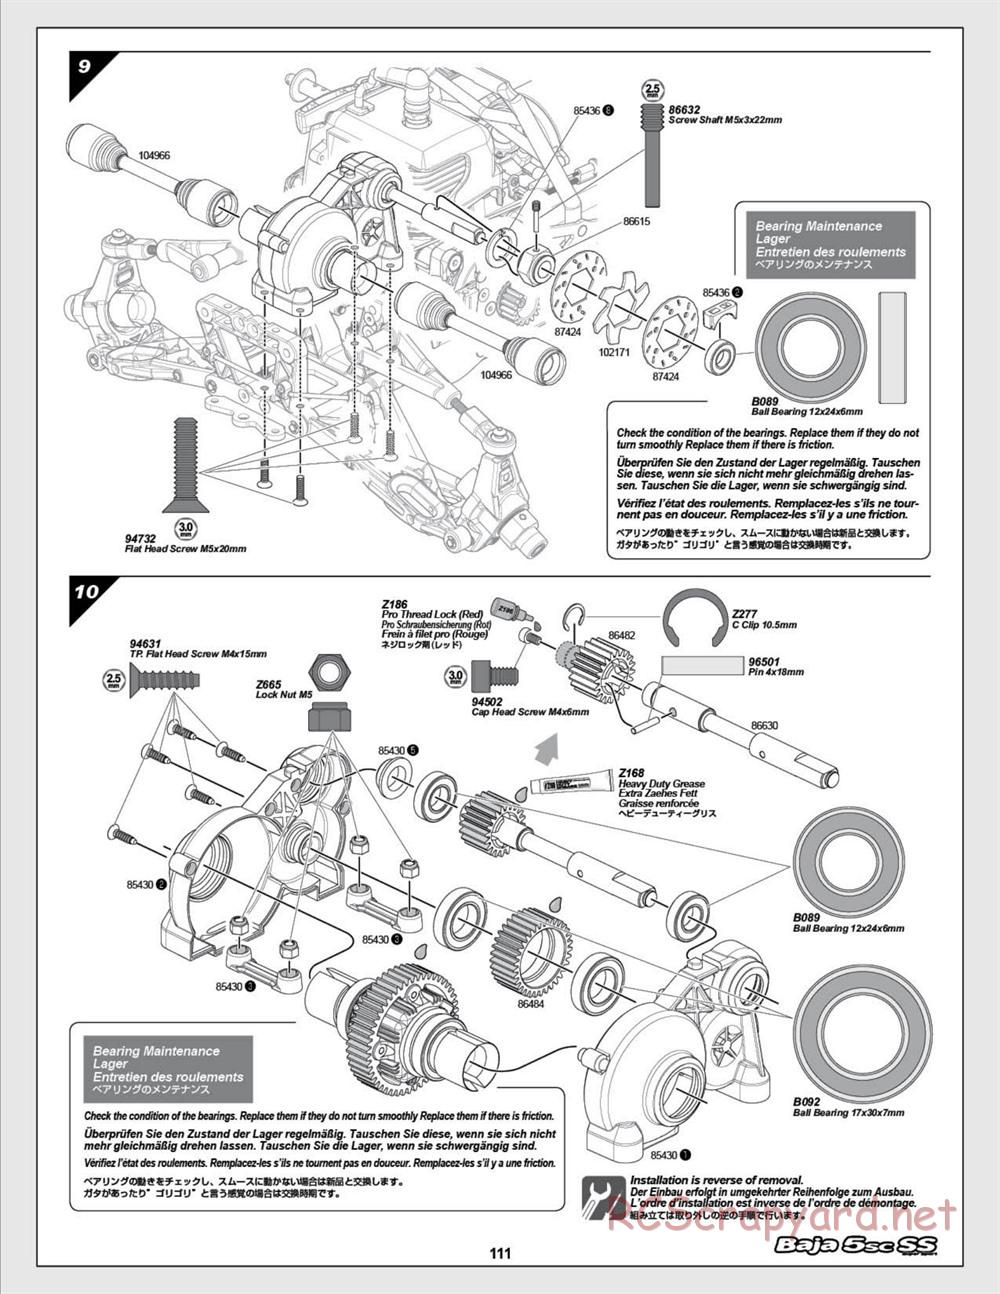 HPI - Baja 5SC SS - Exploded View - Page 111